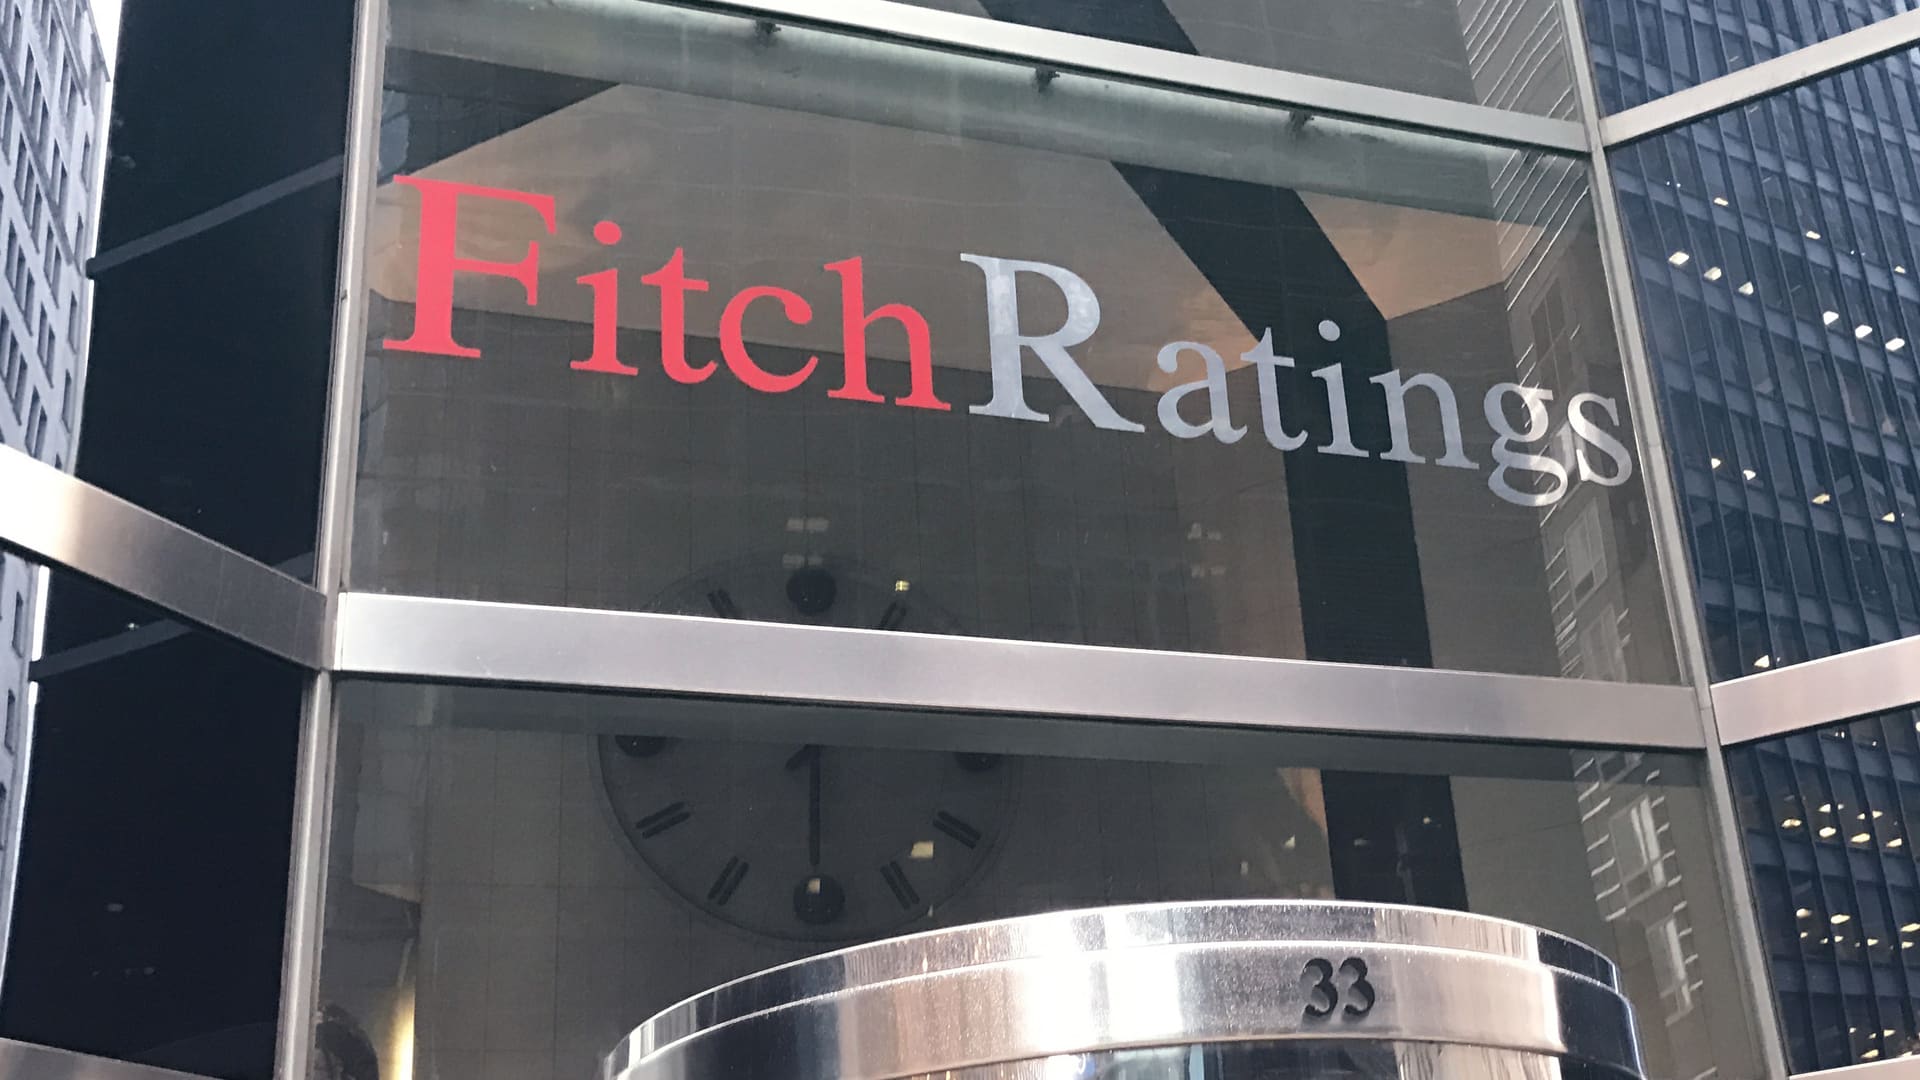 Fitch affirms India's sovereign rating on robust growth, resilient external finances